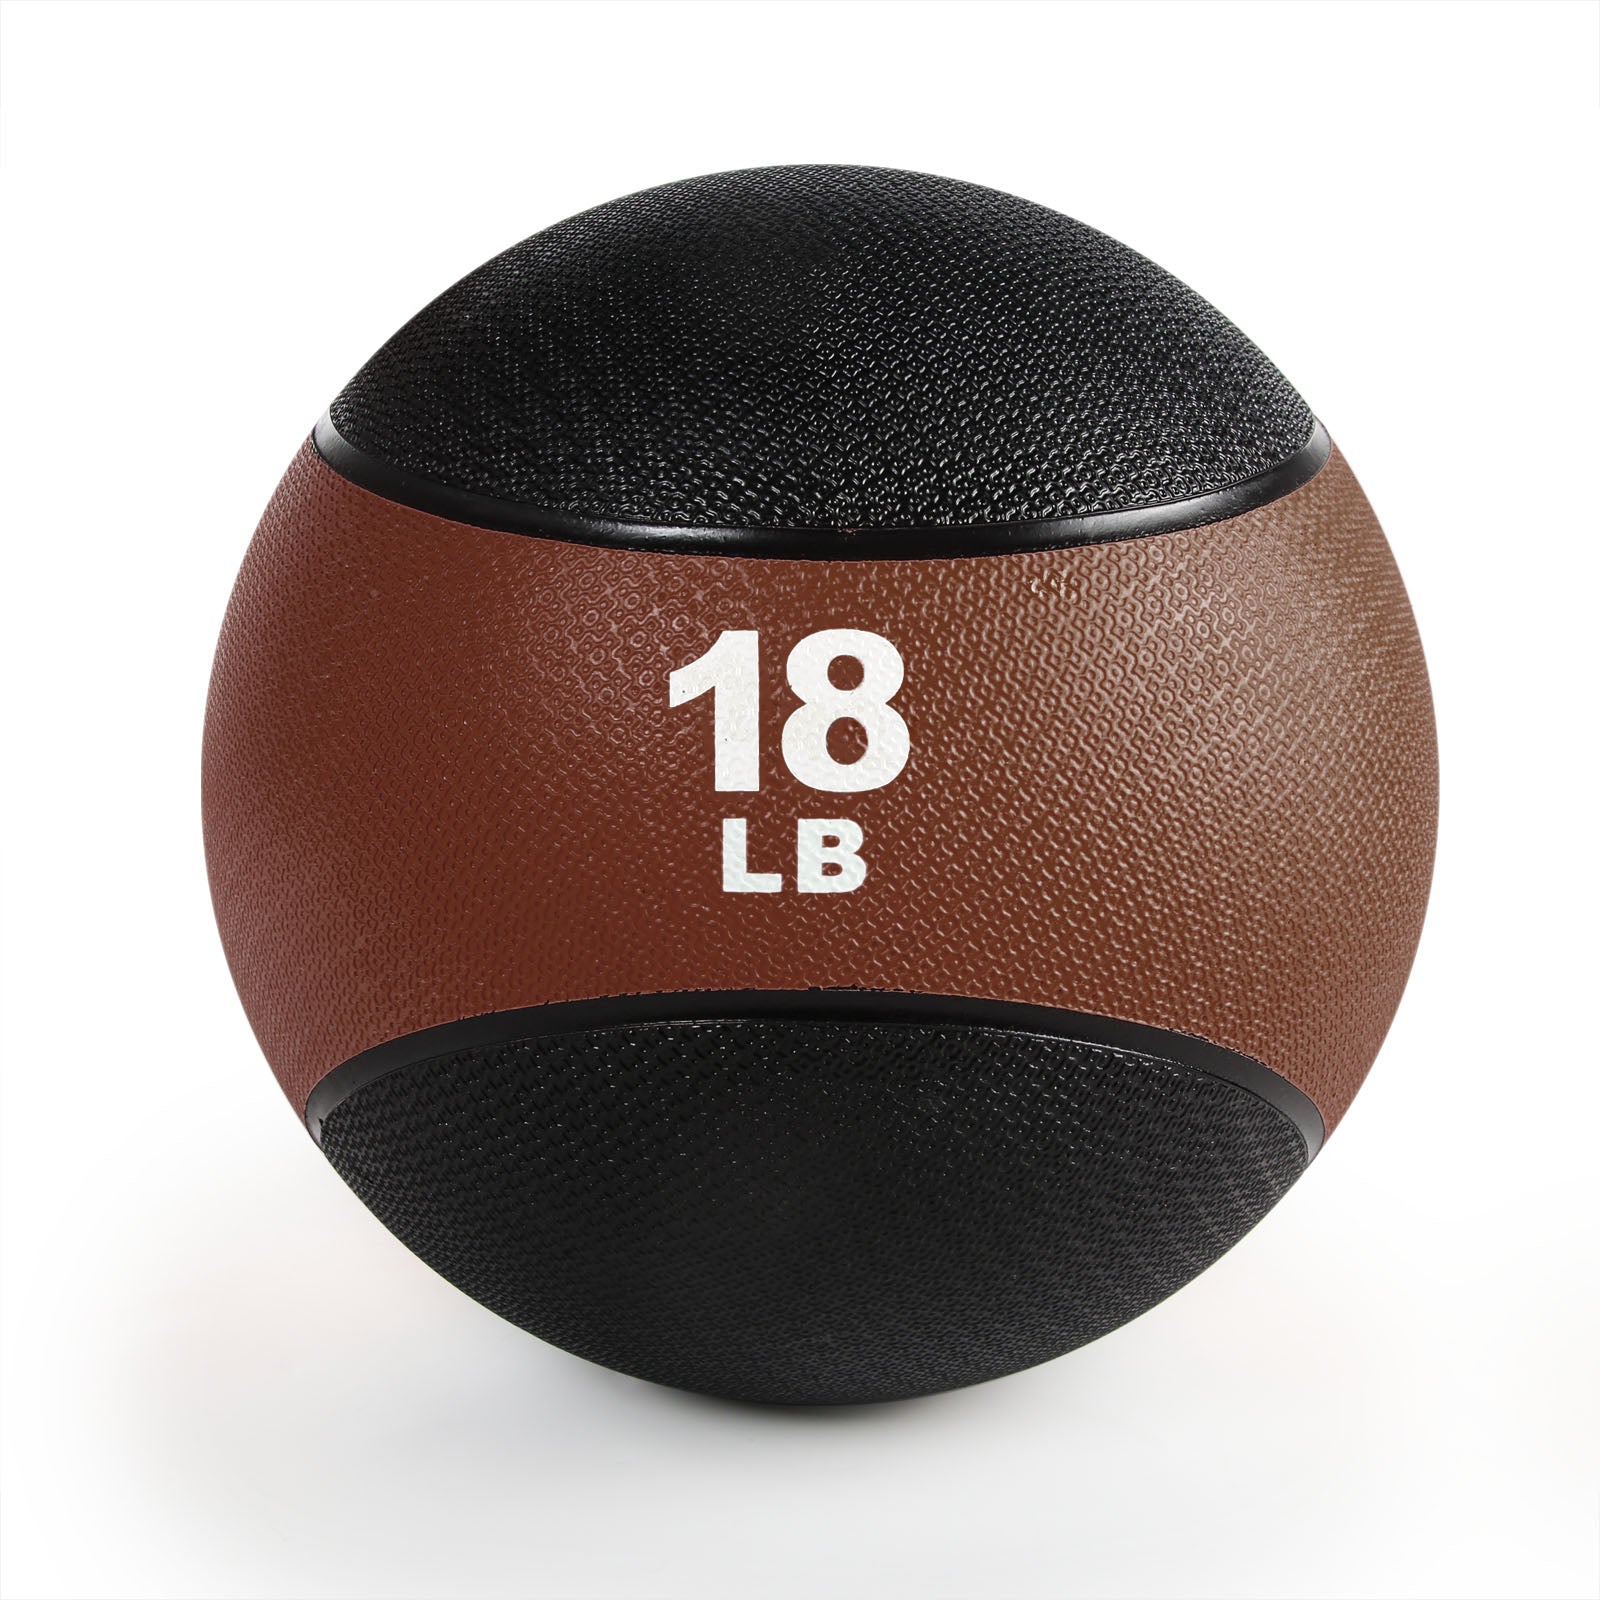 Weighted Medicine Ball Rubber Exercise Ball 18LBS-Brown